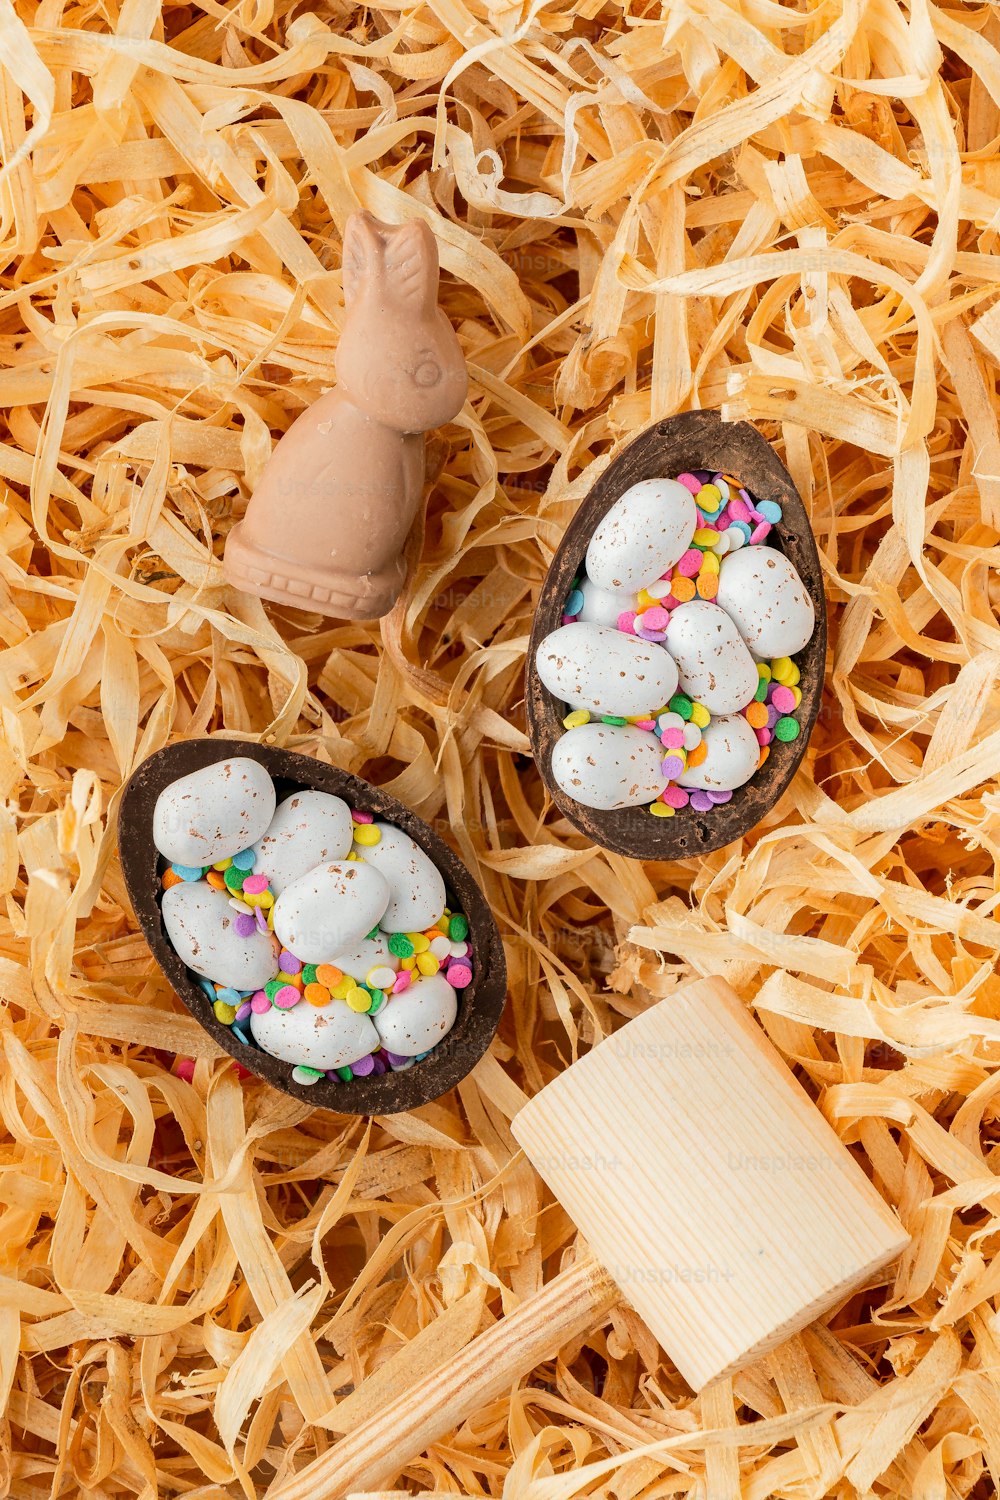 two small chocolate eggs with marshmallows in them